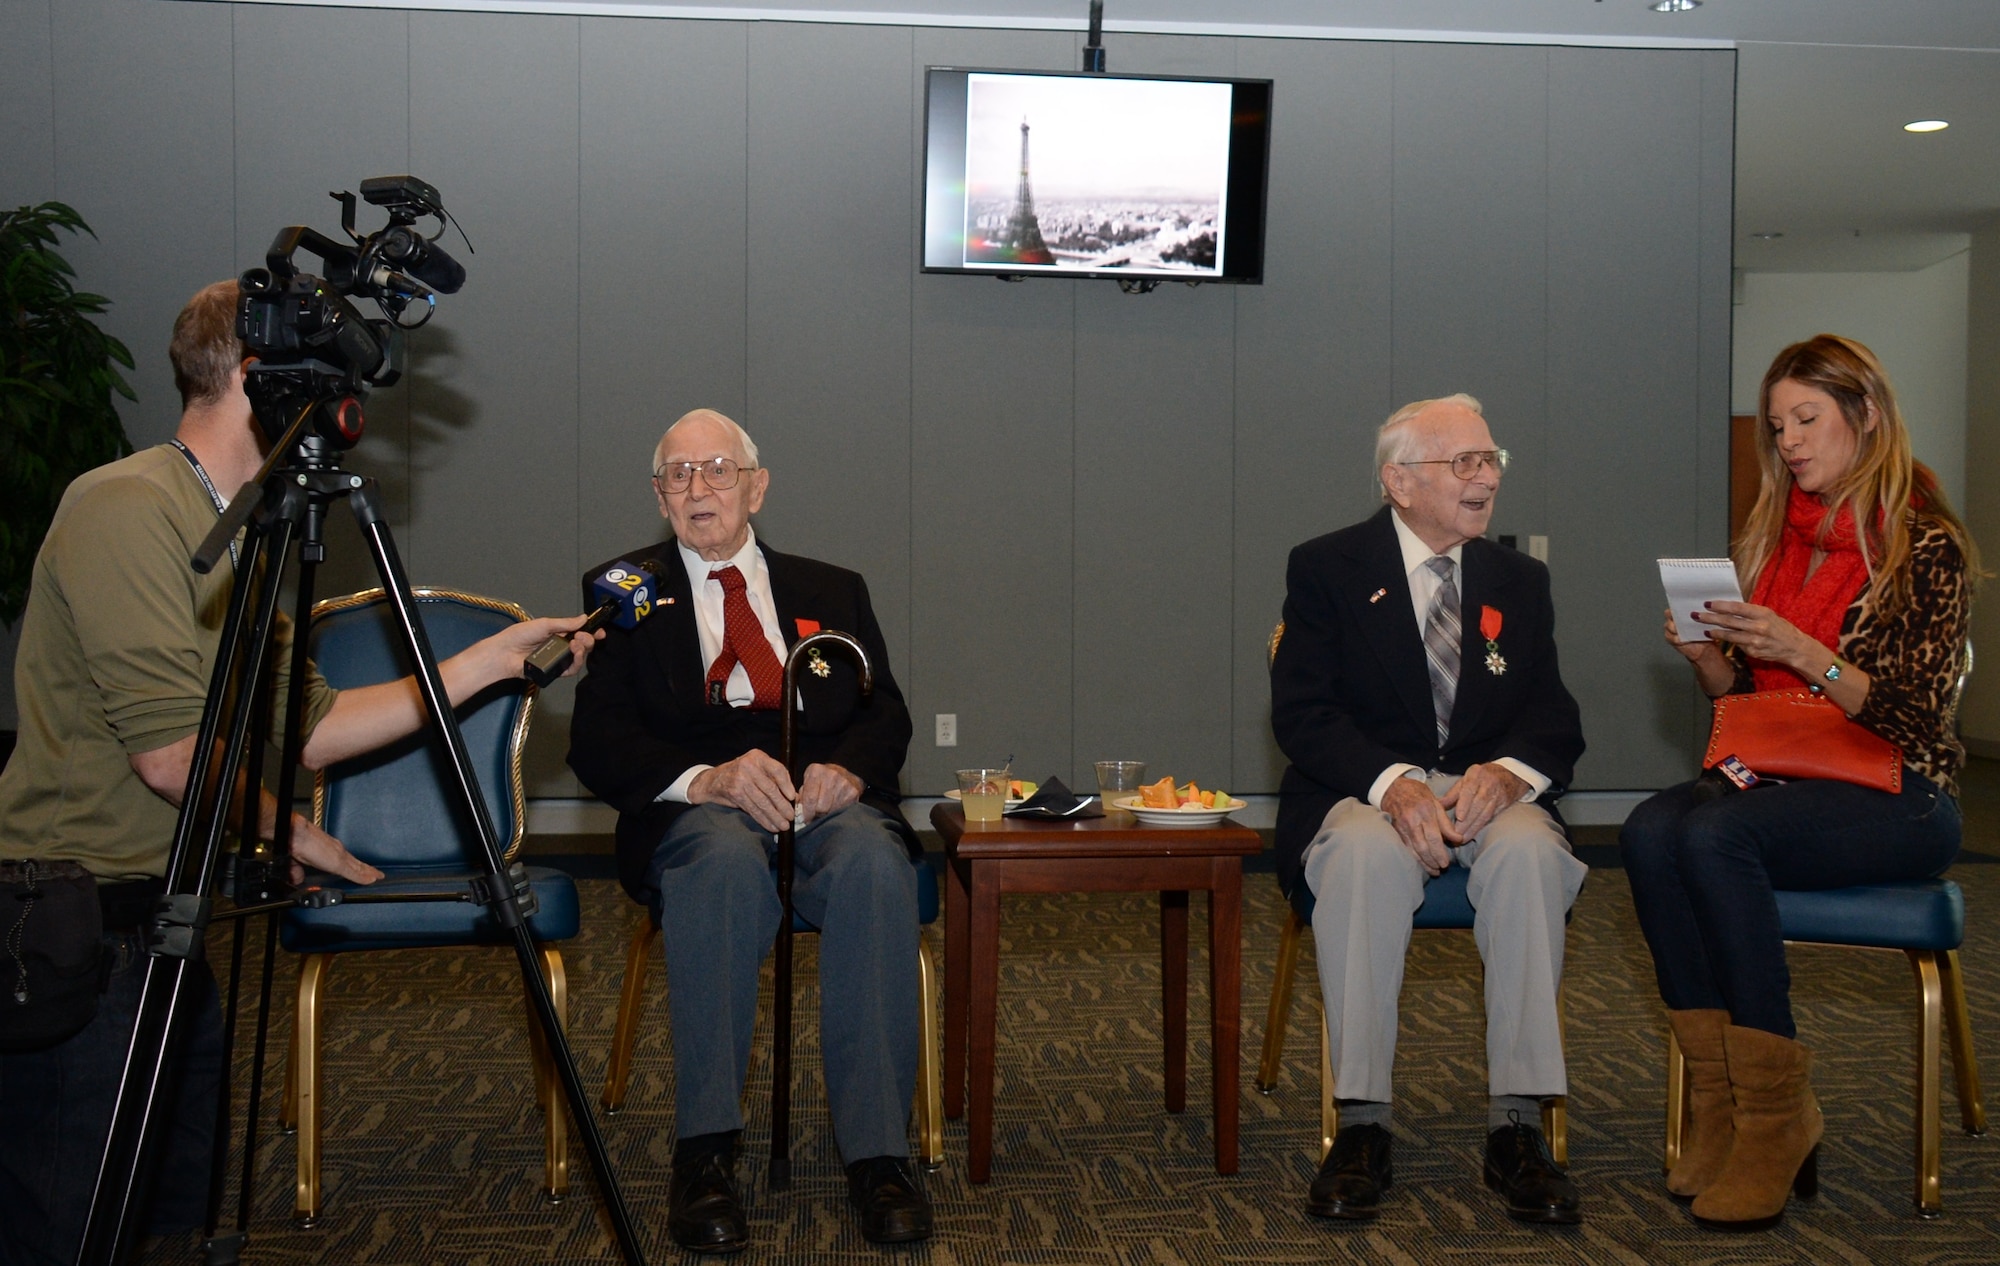 Retired Air Force Reserve Majs. Raymond “Glenn” Clanin and Russell “Lynn” Clanin take time for interviews with reporters from various Los Angeles television stations in the Gordon Conference Center at the Schriever Space Complex of the Space and Missile Systems Center at Los Angeles Air Force Base in El Segundo, Calif., Dec. 2. The 92-year-old twin brothers are recent recipients of the French government's highest distinction for their military service as World War II veterans, the Legion of Honor medal, presented by Christophe Lemoine, French consul general in Los Angeles. In the background is an aerial photo of the Eiffel Tower, taken from the right pilot’s seat of the B-26 Marauder named Flak-Bait by Maj. Glenn Clanin as he “buzzed” the famous landmark after the Liberation of France during WWII. (U.S. Air Force photo/Van De Ha)